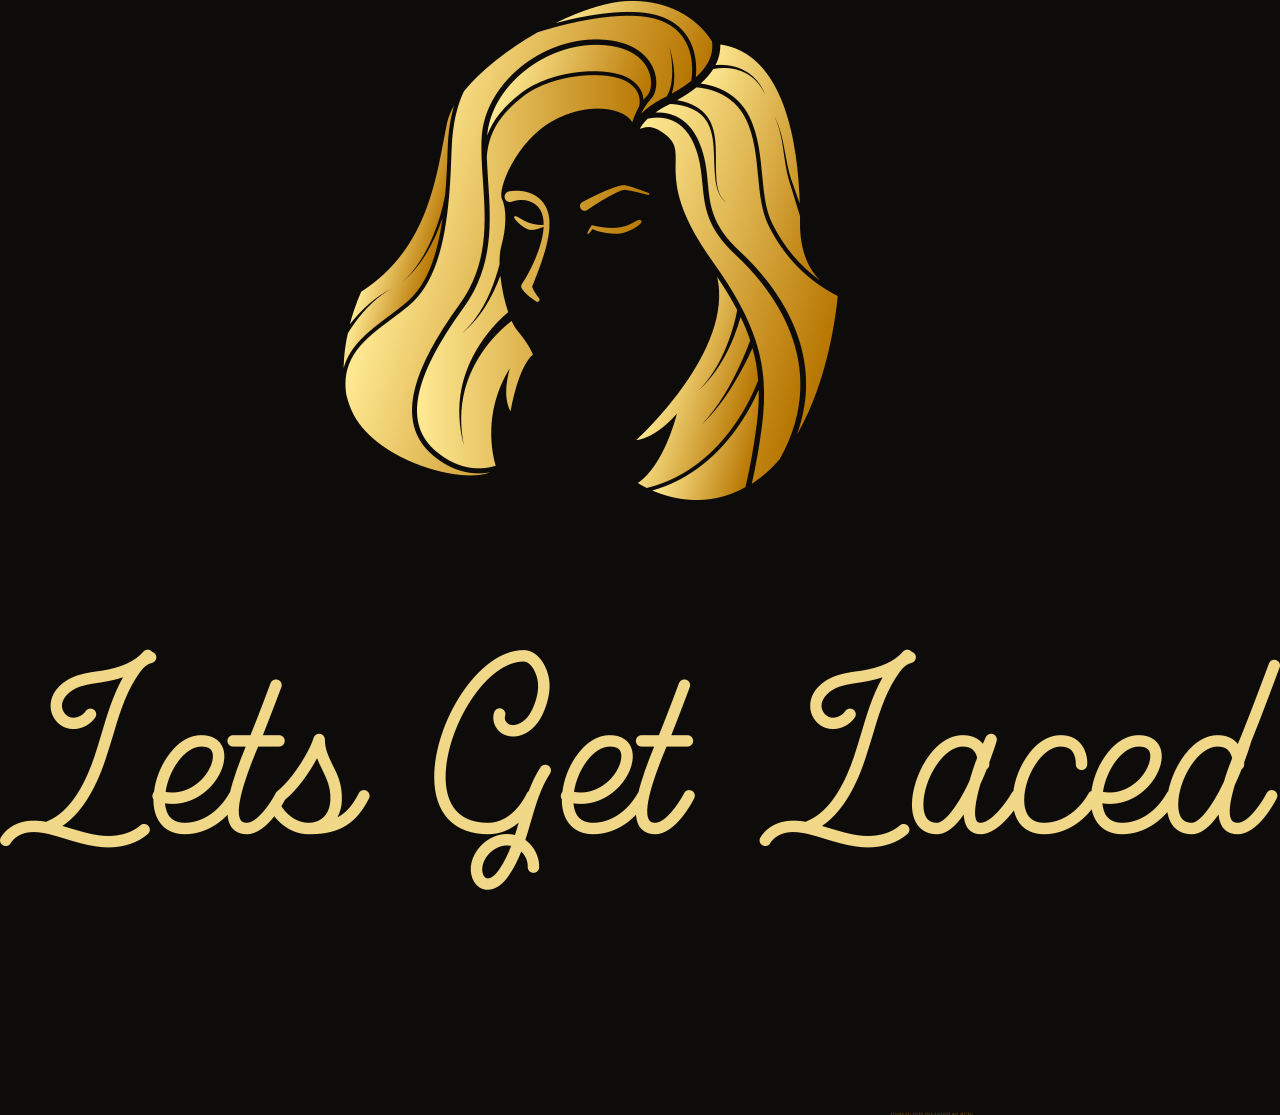 Lets Get Laced's logo